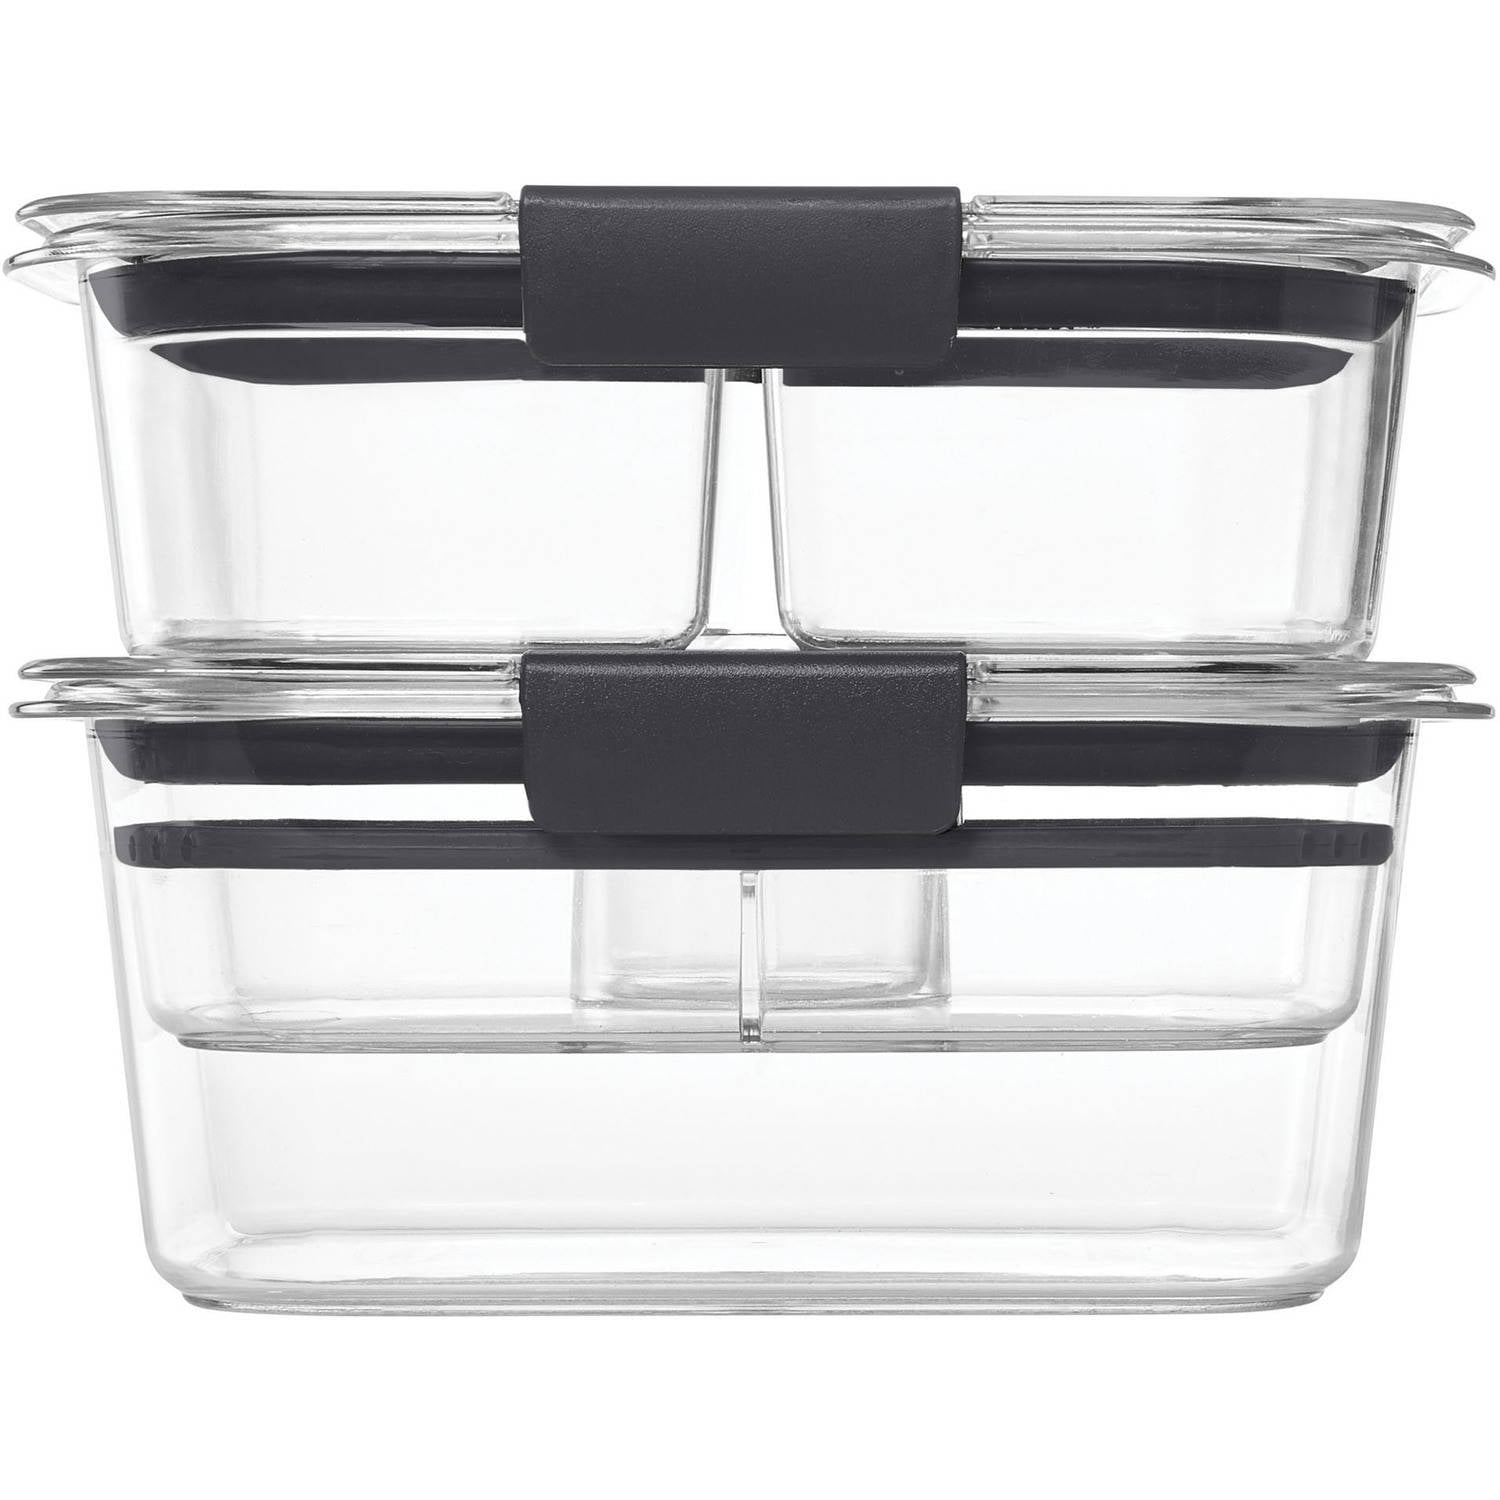 Rubbermaid rubbermaid brilliance food storage container, salad and snack  lunch combo kit, clear, 9 piece set 1997843